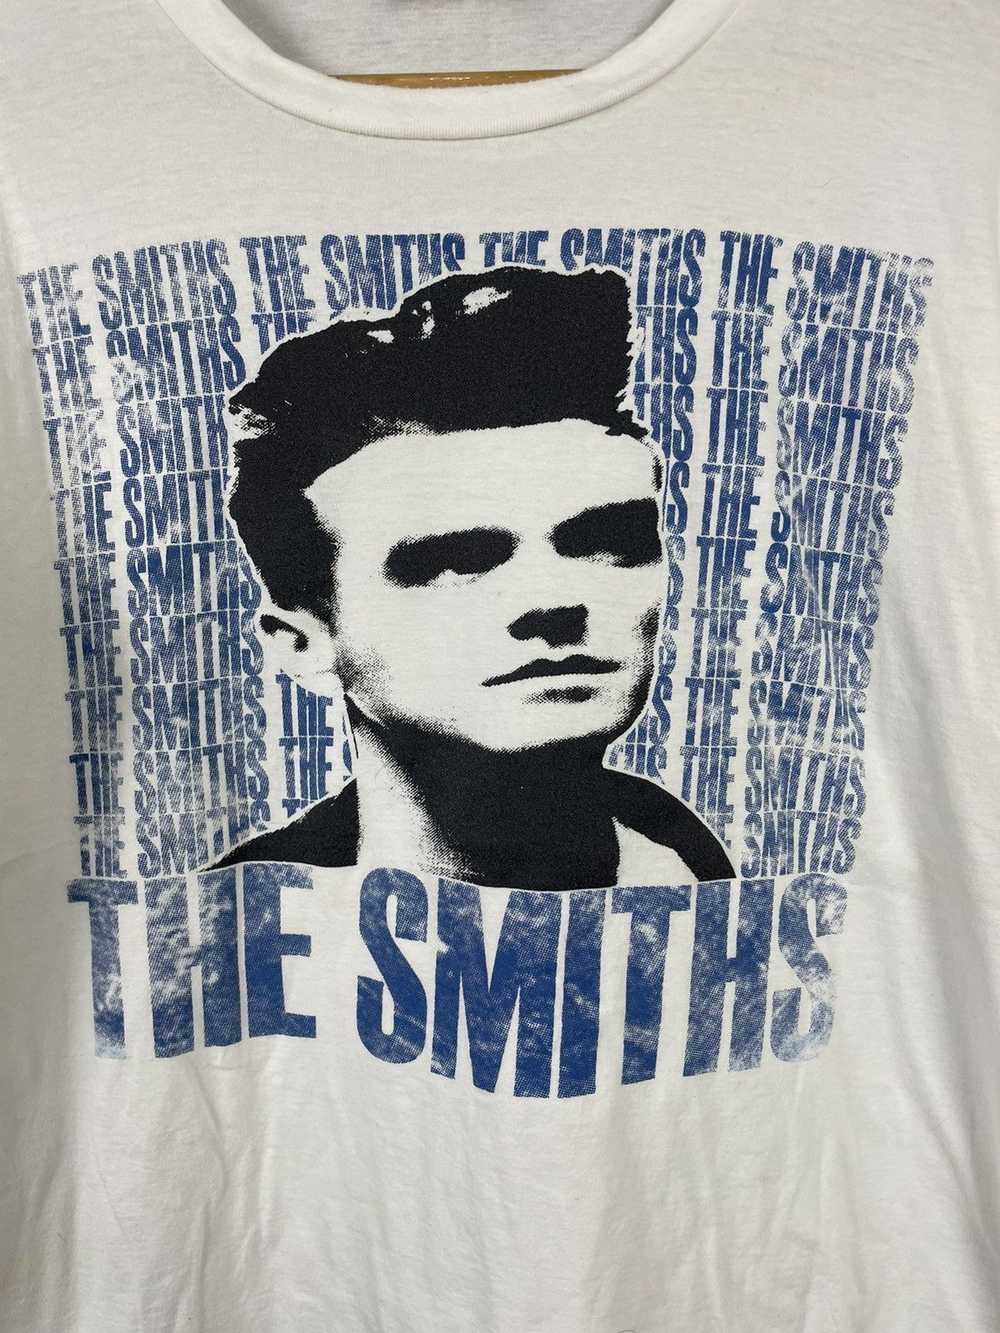 Band Tees × Rock Band × The Smiths The Smiths Mor… - image 2